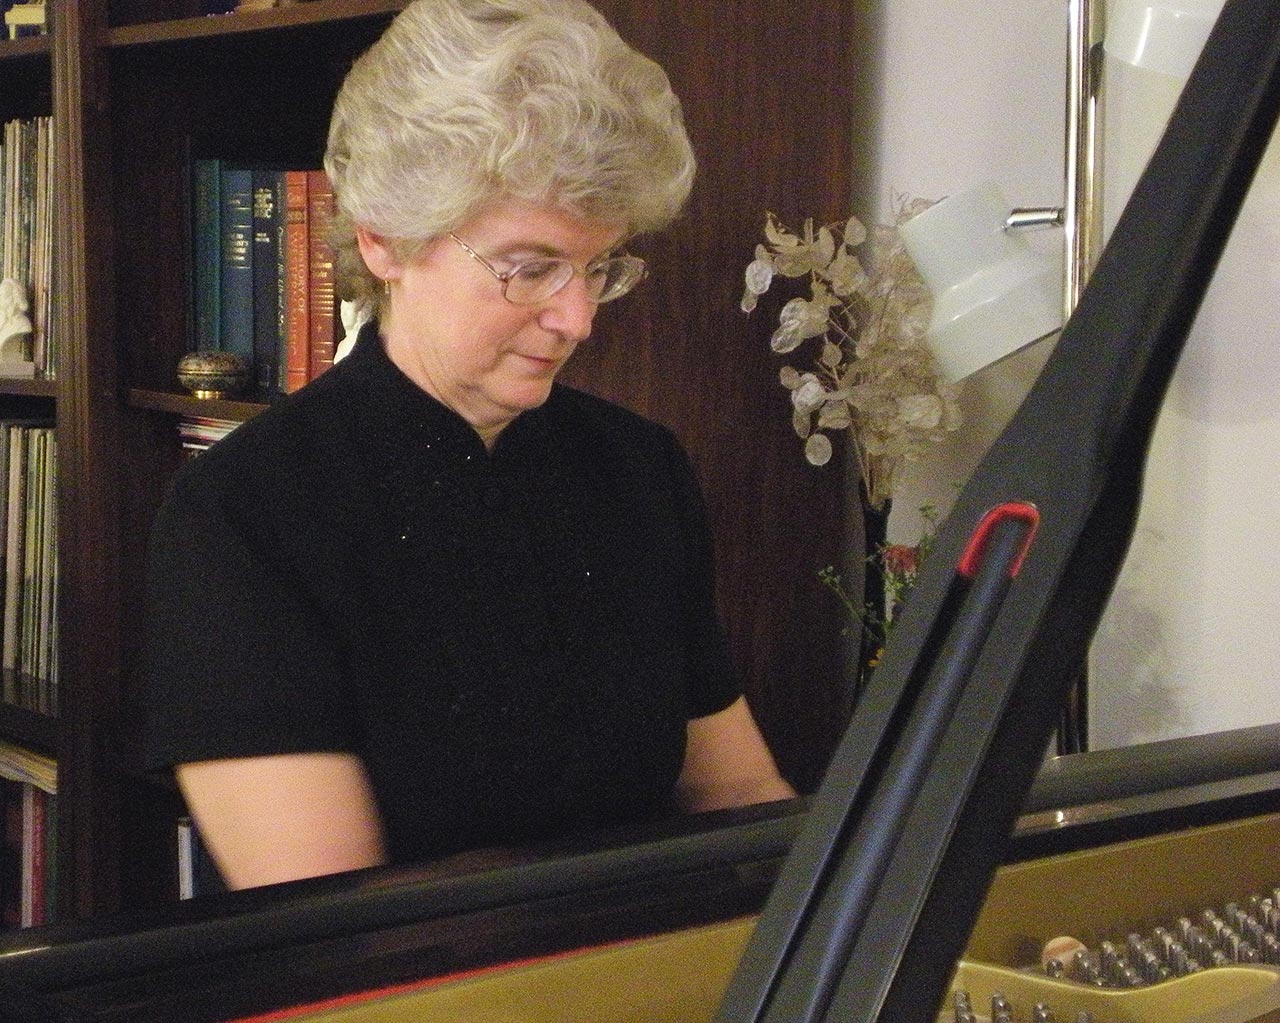 Jeanette Winsor, pianist, will perform Variations on Shenandoah and Vibes on September 16 and September 23, 2023